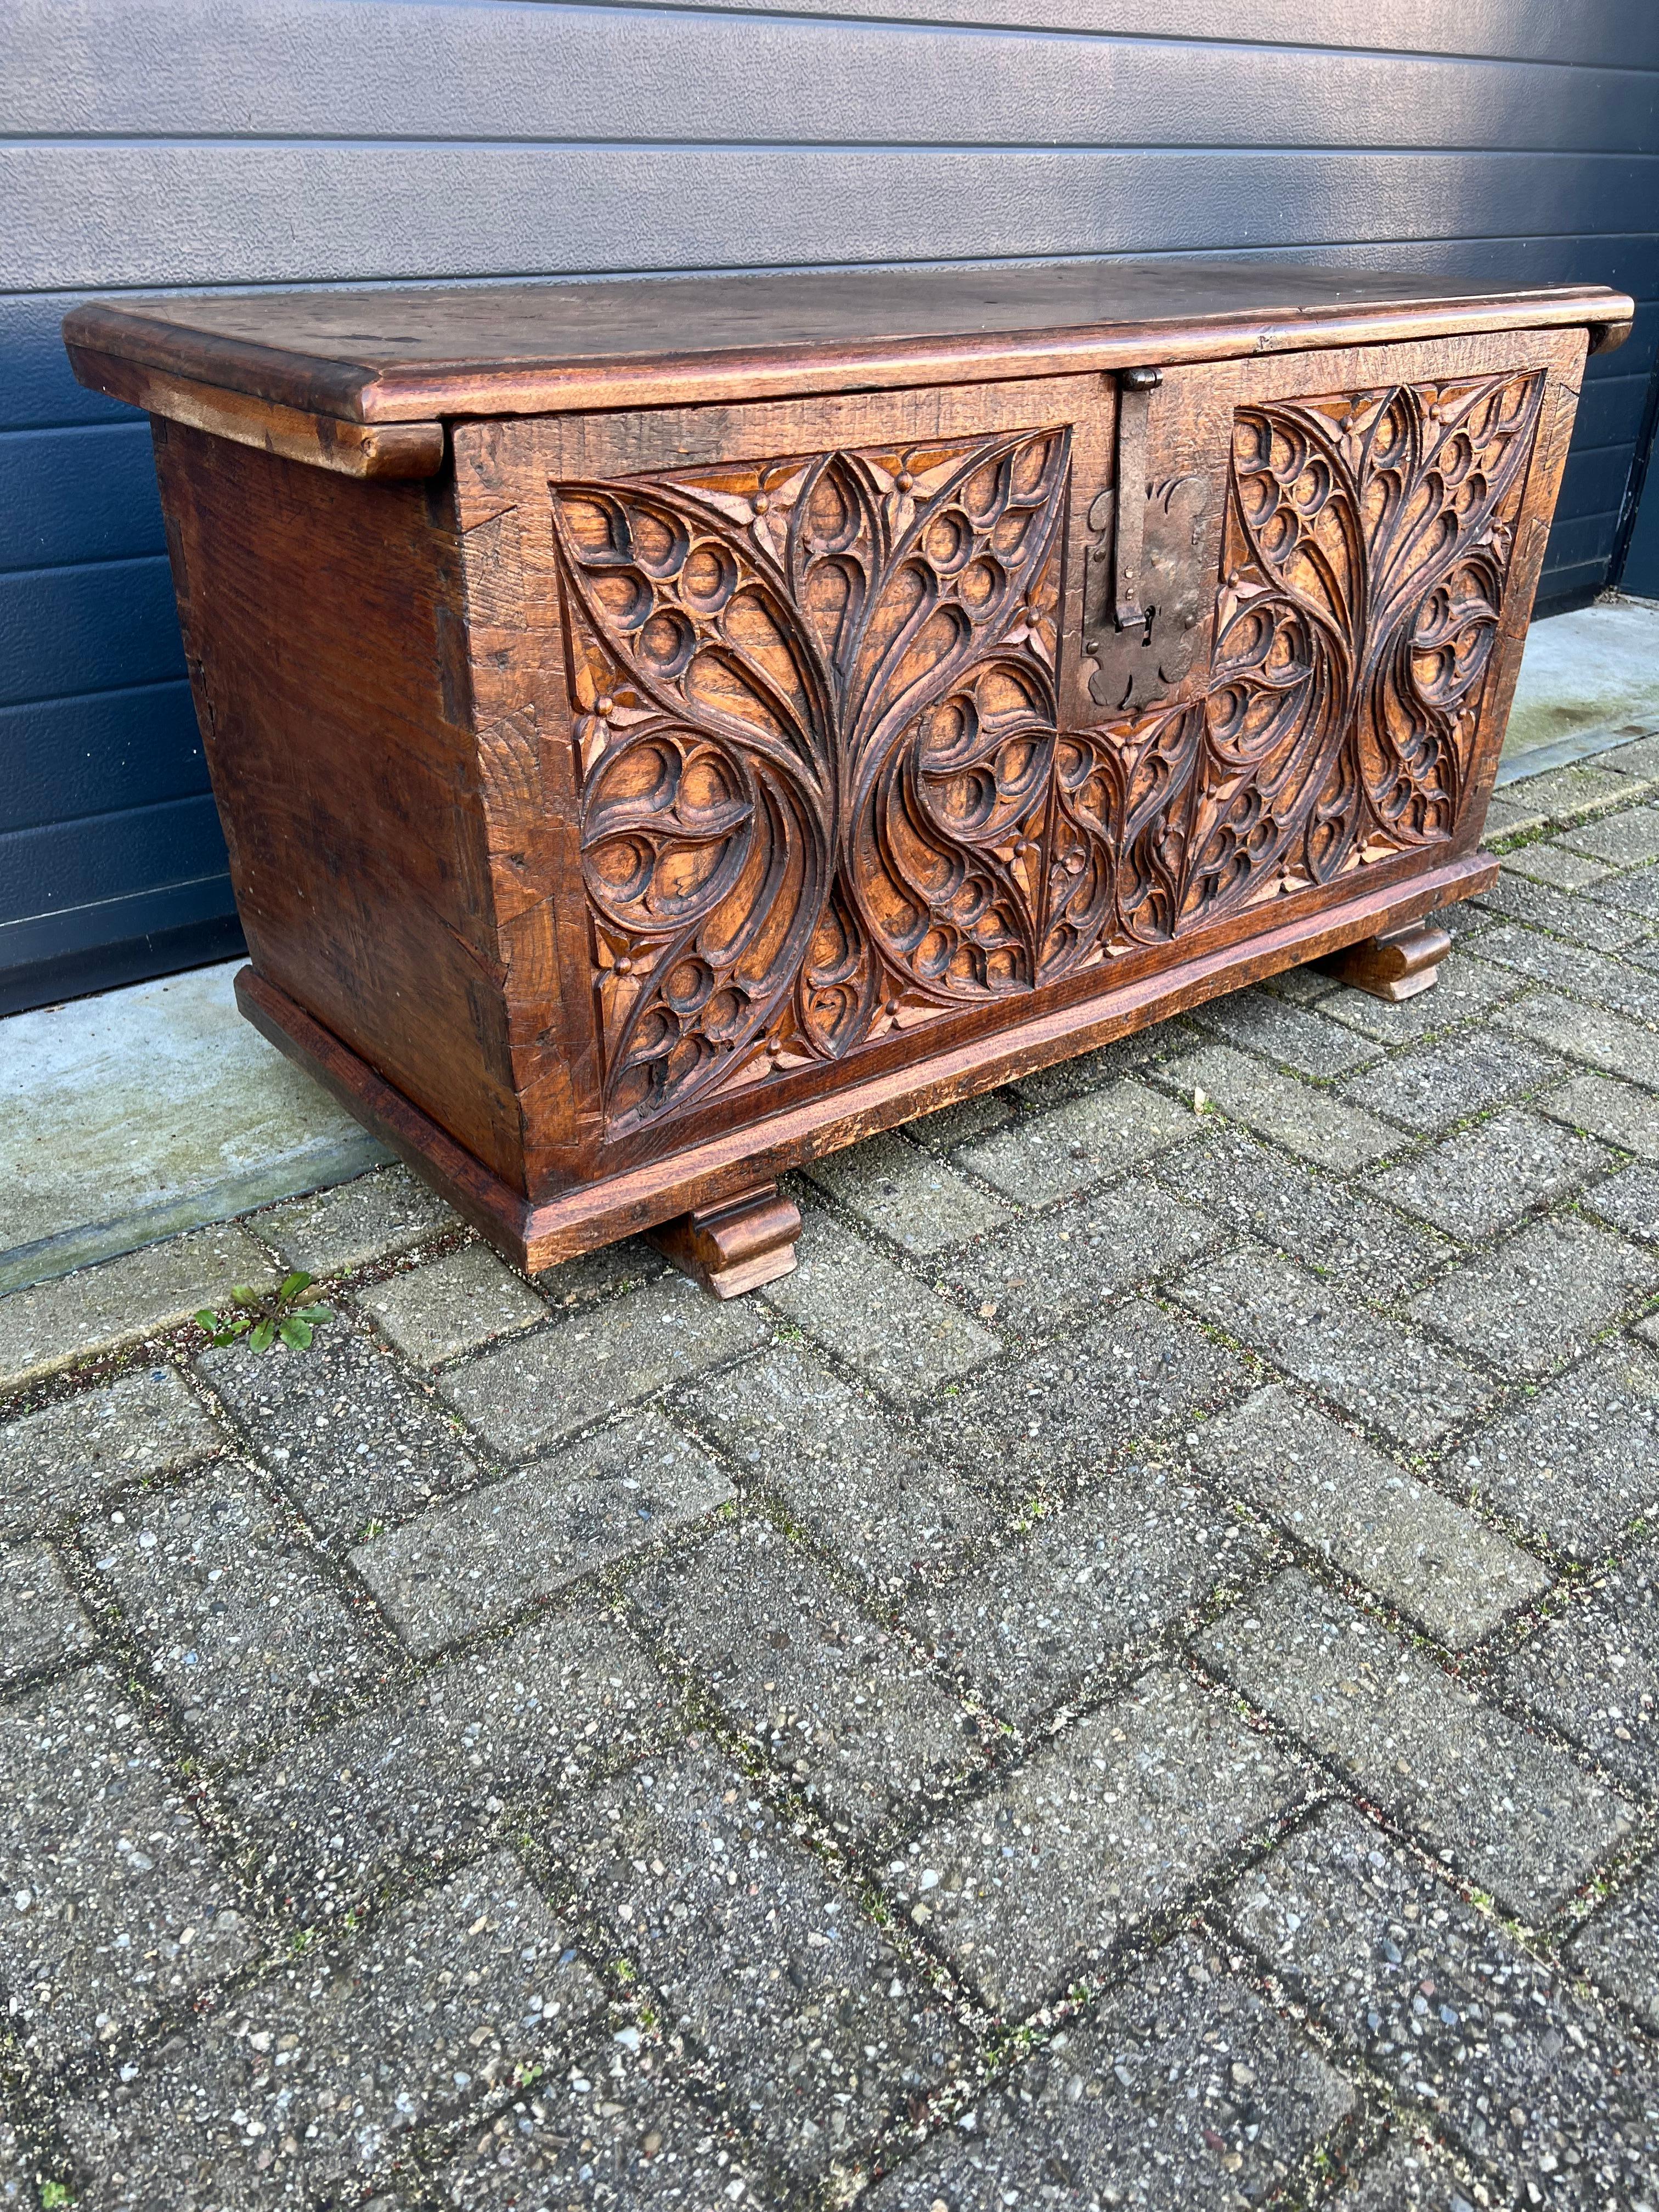 Stunning Antique Gothic Revival Hand Carved Elm Wood Blanket Chest / Trunk 1750 For Sale 2